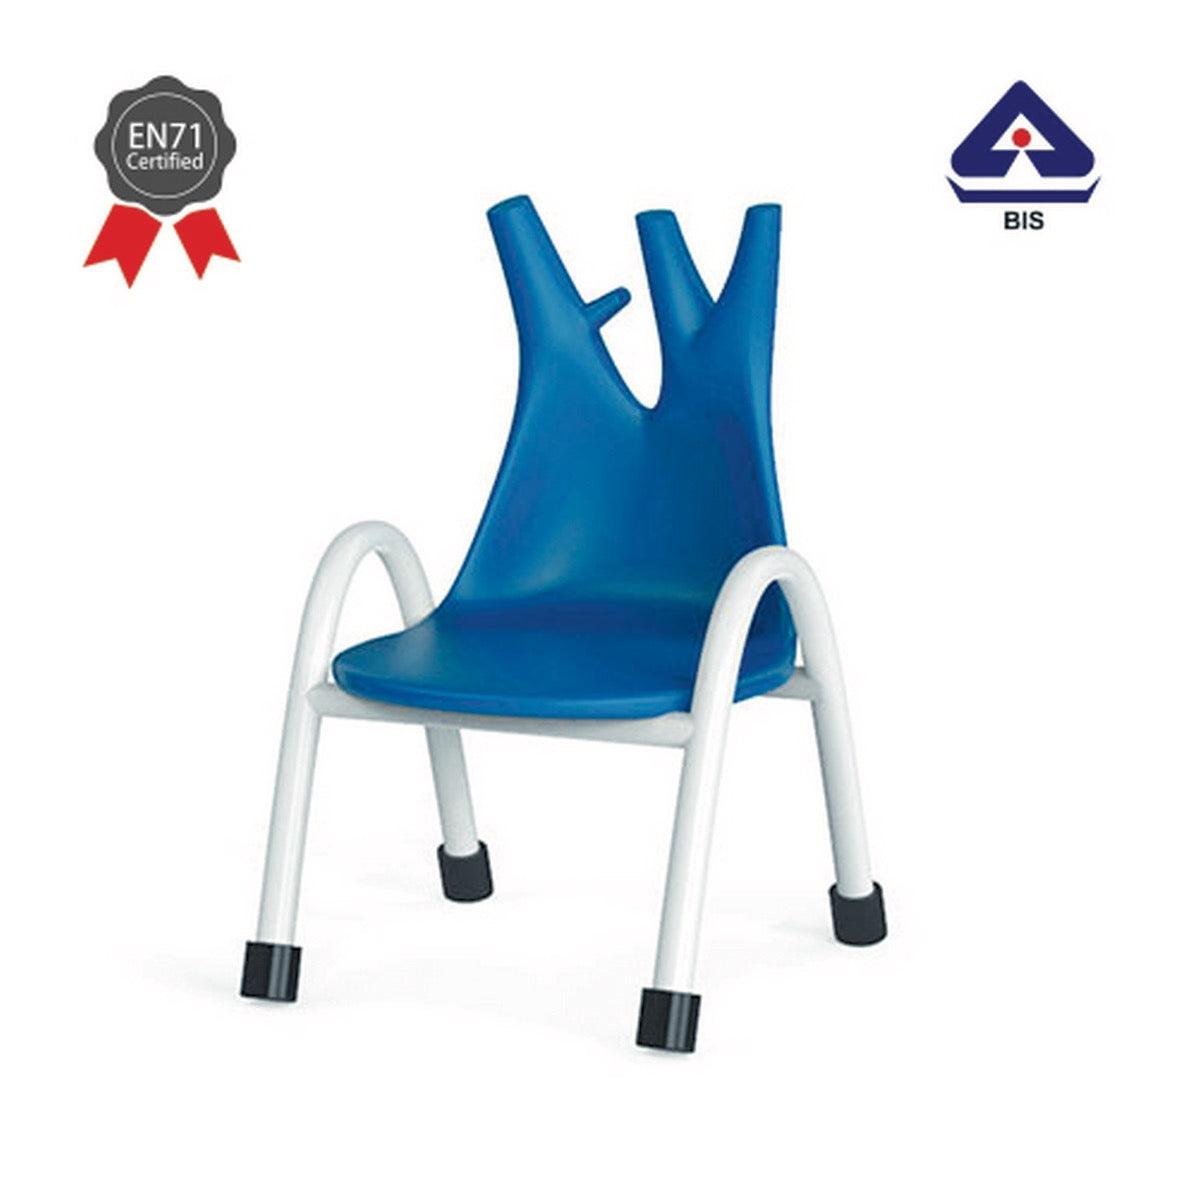 Ok Play Trunk Chair, Study Chair, Sturdy And Durable Chair, Plastic Chair, Perfect For Home, Creches And School, Blue, 2 to 4 Years, Height 8 Inches